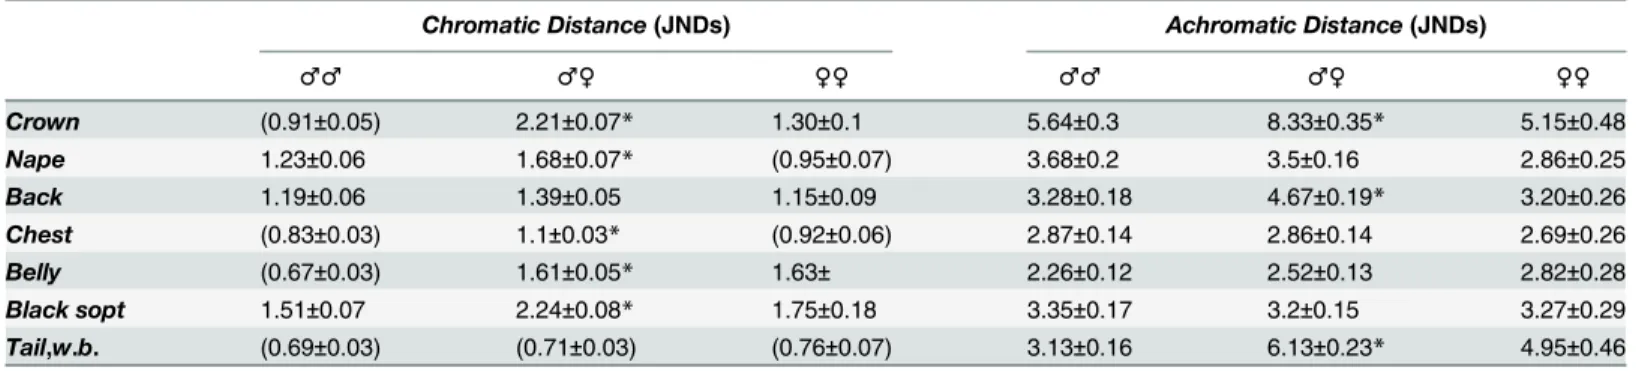 Table 2. Color distance in just noticeable differences (JNDs).